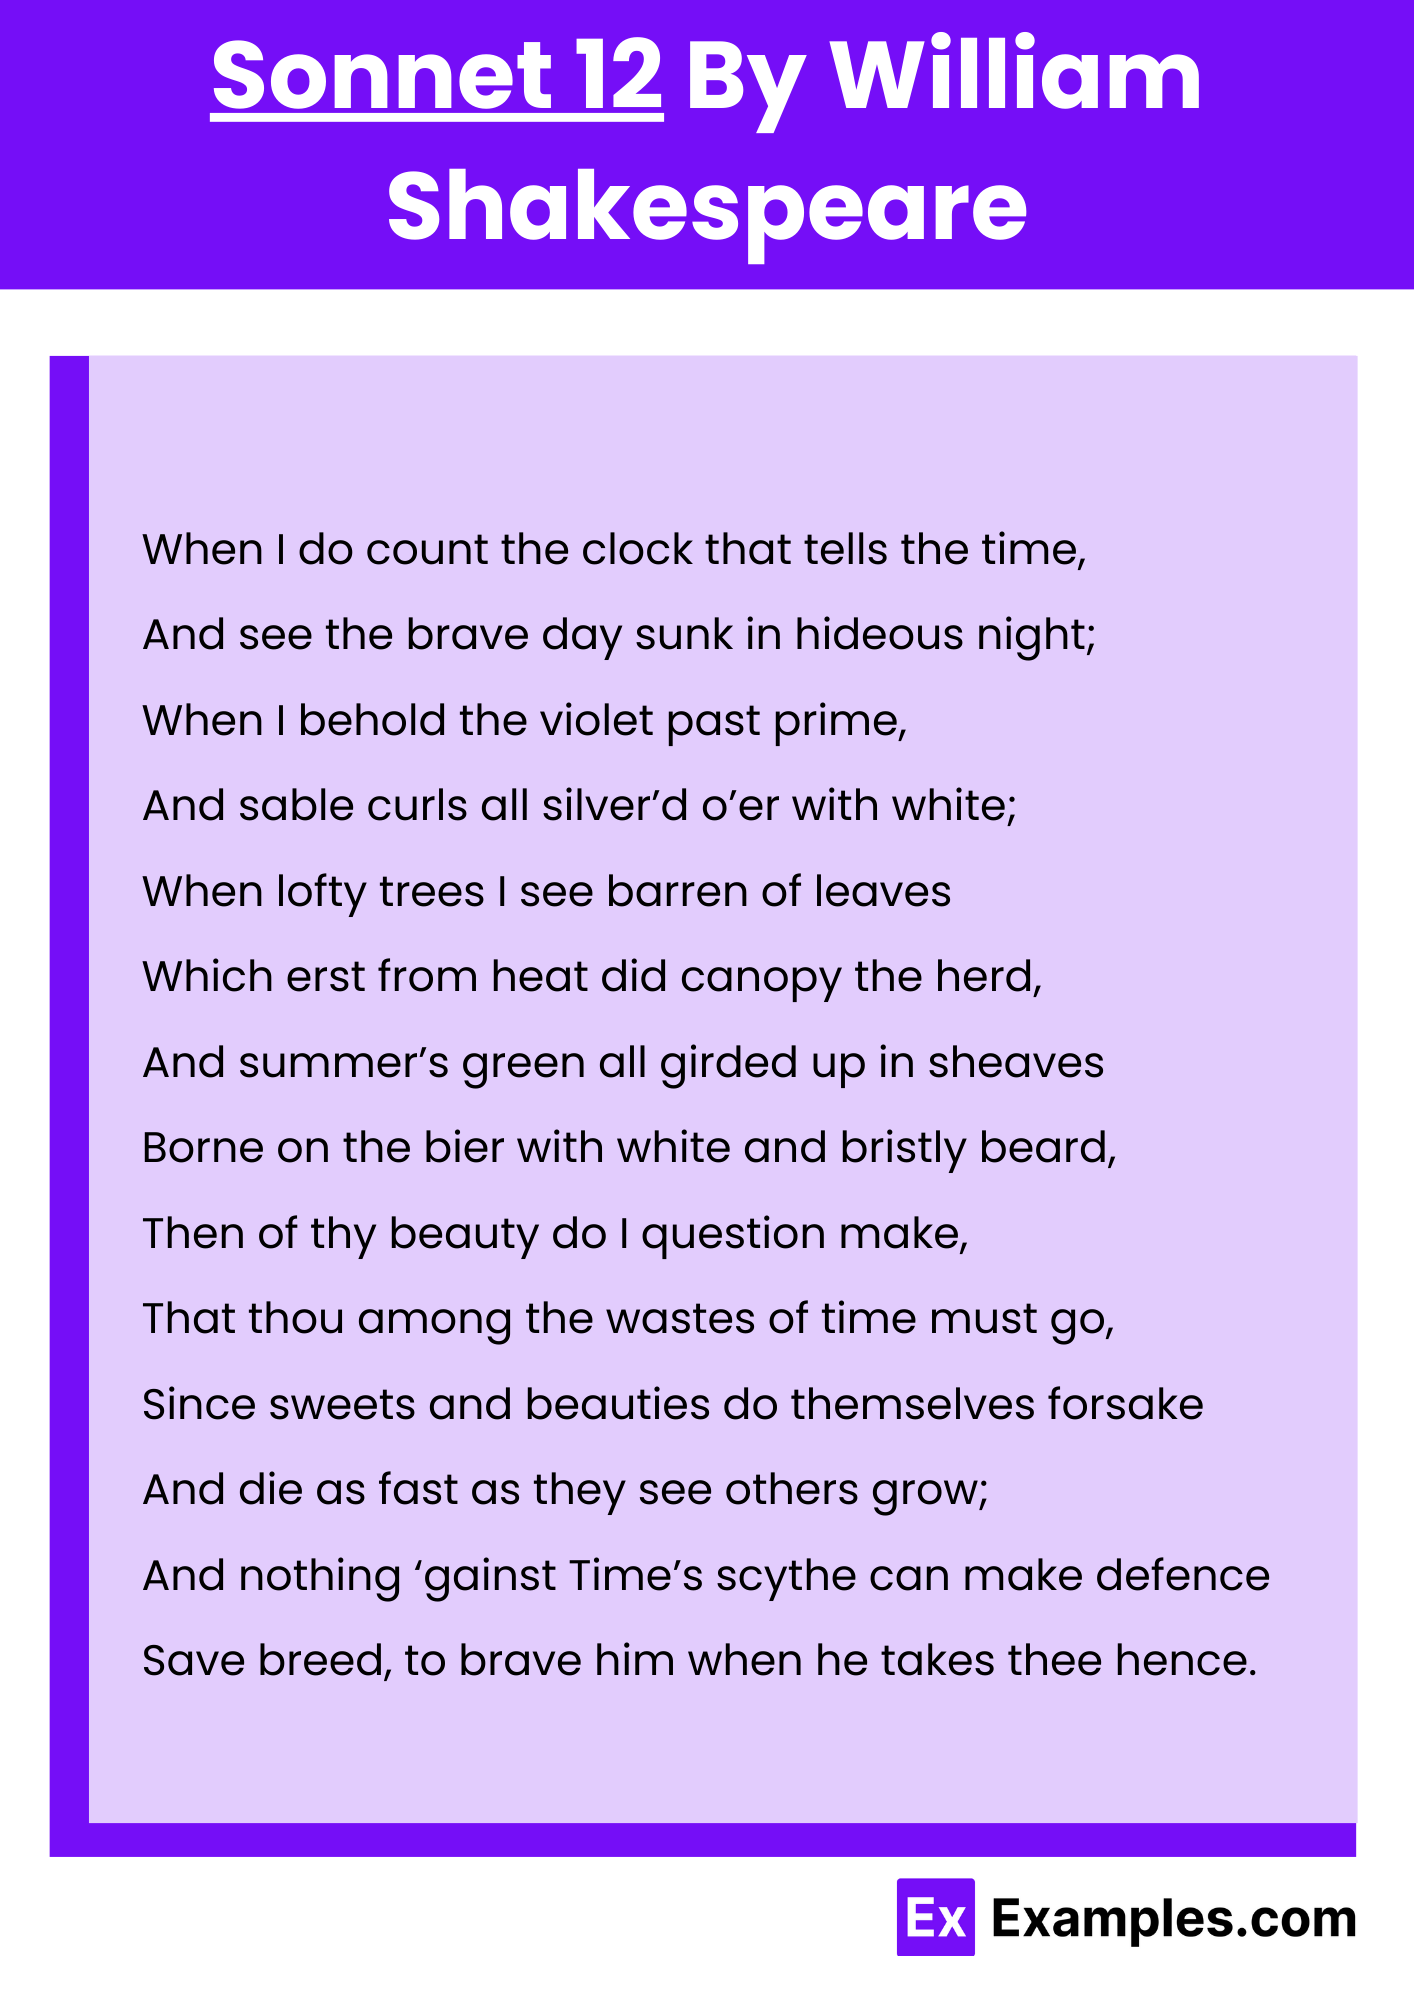 Sonnet 12 By William Shakespeare